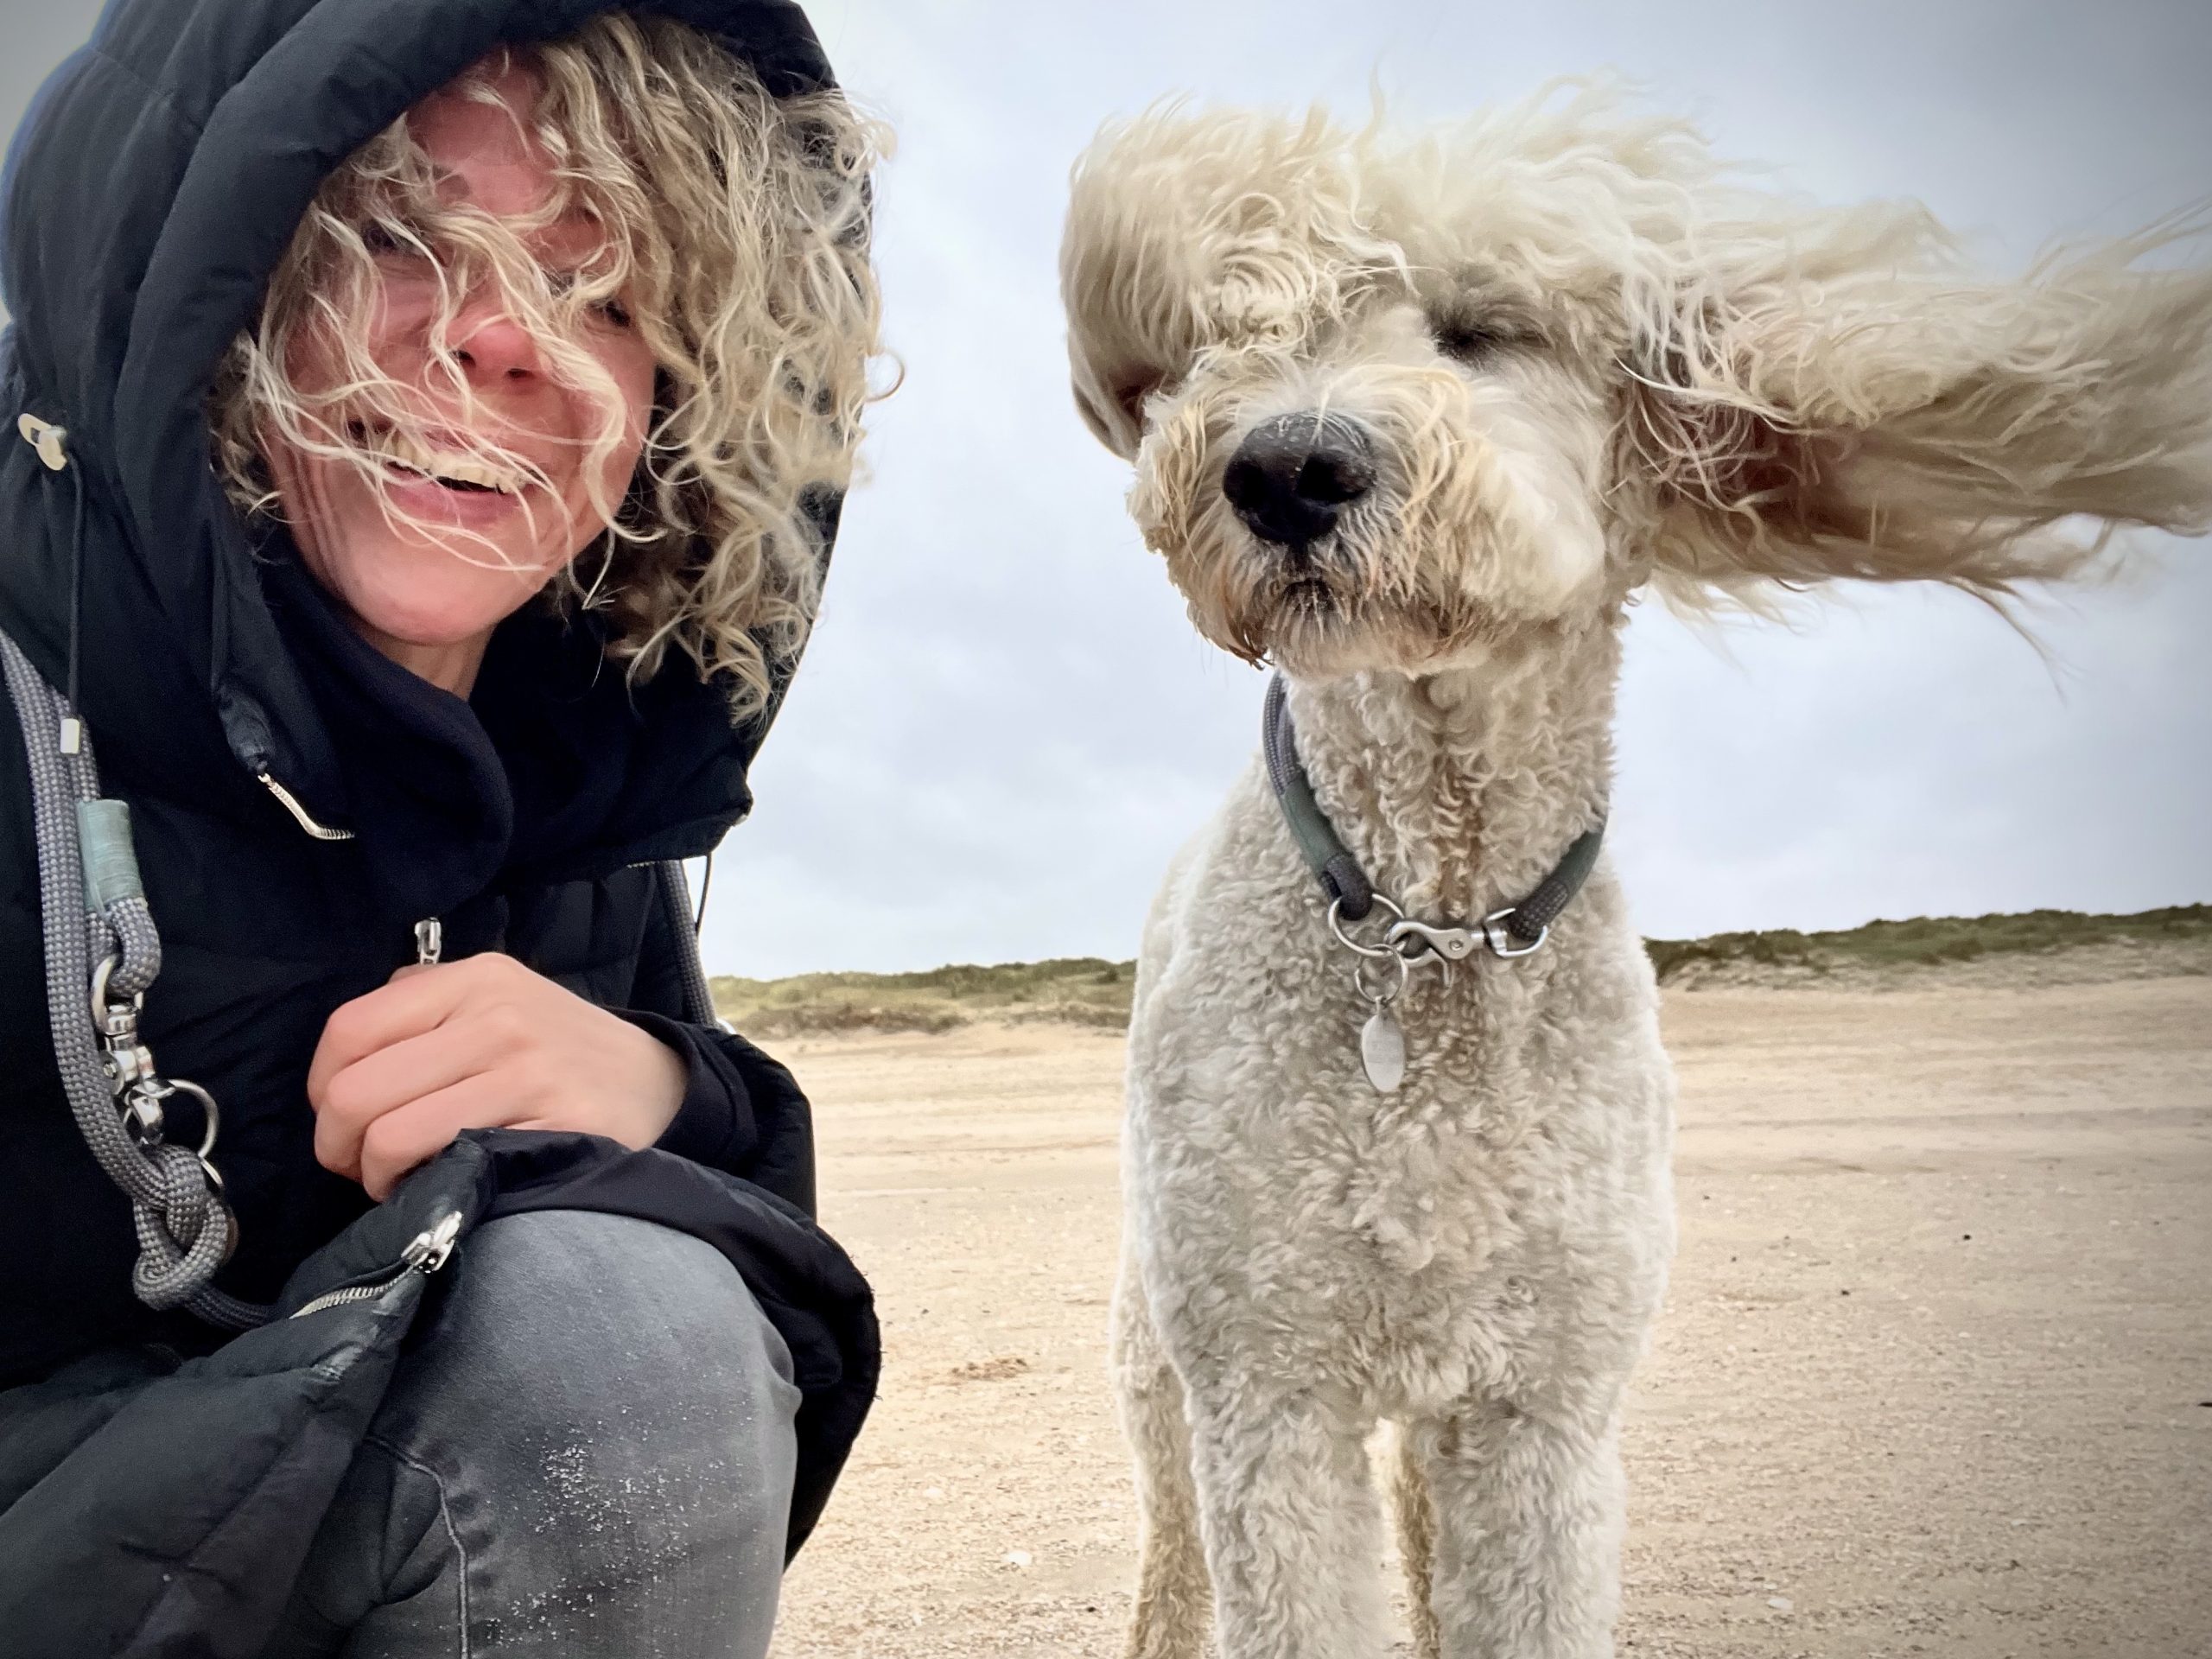 The Comedy Pet Photography Awards 2024 Julia Illig Hamburg Germany Title: Curls in the wind Description: Good looking curly couple having a good time at the windy beach. Animal: woodywoodstock2020 Location of shot: Sylt Island